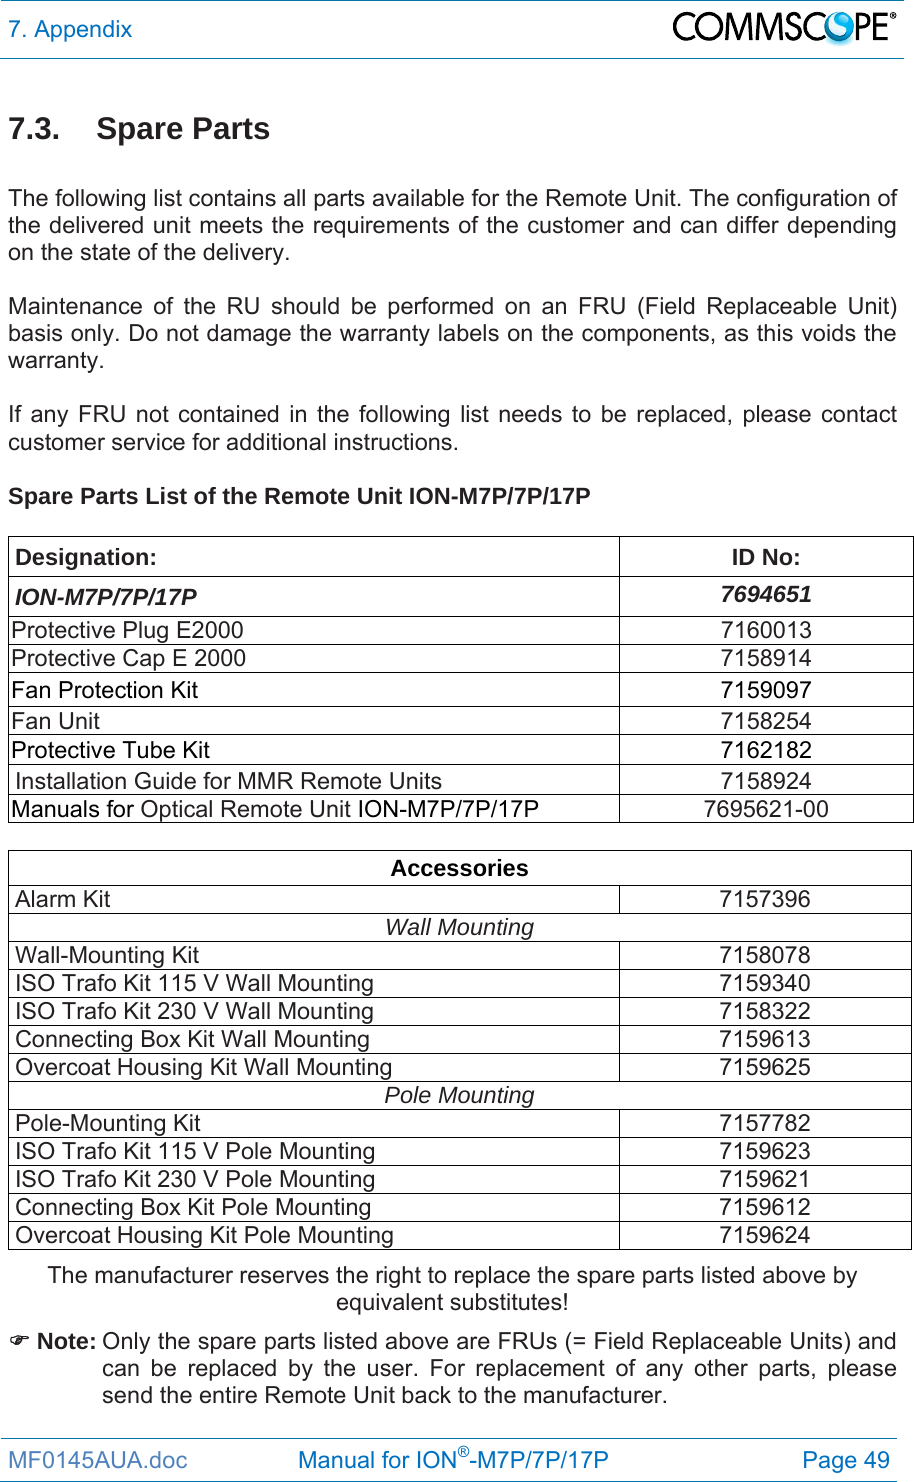 7. Appendix  MF0145AUA.doc                 Manual for ION®-M7P/7P/17P Page 49 7.3. Spare Parts  The following list contains all parts available for the Remote Unit. The configuration of the delivered unit meets the requirements of the customer and can differ depending on the state of the delivery.  Maintenance of the RU should be performed on an FRU (Field Replaceable Unit) basis only. Do not damage the warranty labels on the components, as this voids the warranty.   If any FRU not contained in the following list needs to be replaced, please contact customer service for additional instructions.  Spare Parts List of the Remote Unit ION-M7P/7P/17P  Designation: ID No: ION-M7P/7P/17P  7694651 Protective Plug E2000  7160013 Protective Cap E 2000  7158914 Fan Protection Kit  7159097 Fan Unit  7158254 Protective Tube Kit  7162182 Installation Guide for MMR Remote Units  7158924 Manuals for Optical Remote Unit ION-M7P/7P/17P  7695621-00  Accessories Alarm Kit  7157396 Wall Mounting Wall-Mounting Kit  7158078 ISO Trafo Kit 115 V Wall Mounting  7159340 ISO Trafo Kit 230 V Wall Mounting  7158322 Connecting Box Kit Wall Mounting  7159613 Overcoat Housing Kit Wall Mounting  7159625 Pole Mounting  Pole-Mounting Kit  7157782 ISO Trafo Kit 115 V Pole Mounting  7159623 ISO Trafo Kit 230 V Pole Mounting  7159621 Connecting Box Kit Pole Mounting  7159612 Overcoat Housing Kit Pole Mounting  7159624 The manufacturer reserves the right to replace the spare parts listed above by equivalent substitutes!  Note: Only the spare parts listed above are FRUs (= Field Replaceable Units) and can be replaced by the user. For replacement of any other parts, please send the entire Remote Unit back to the manufacturer.  